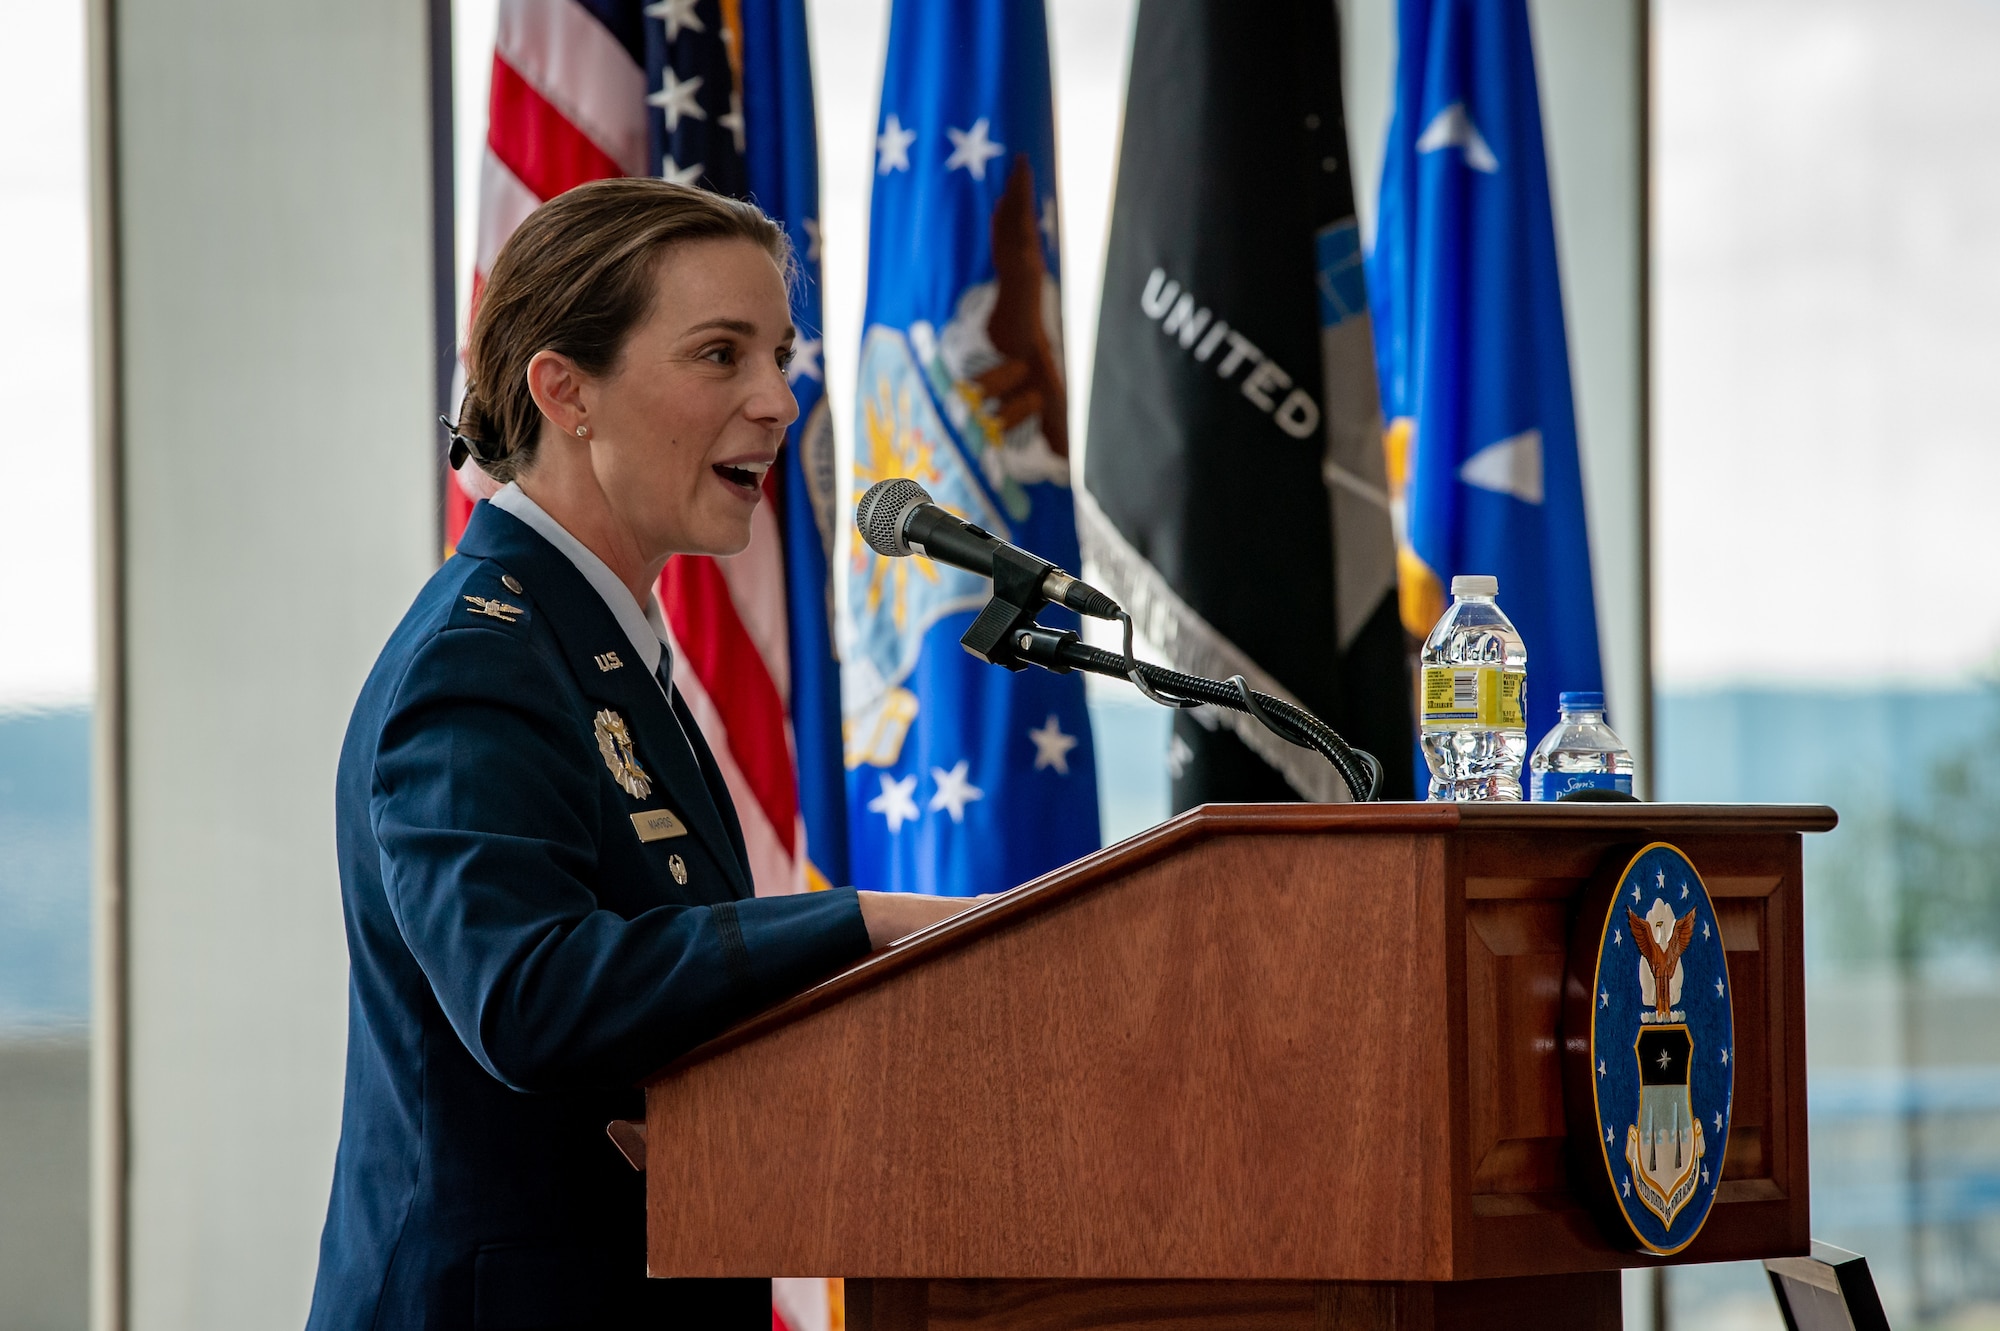 Colonel Beth Makros delivers remarks during a Permanent Professor Investiture ceremony at Arnold Hall, U.S. Air Force Academy Colorado, August 19th 2022.